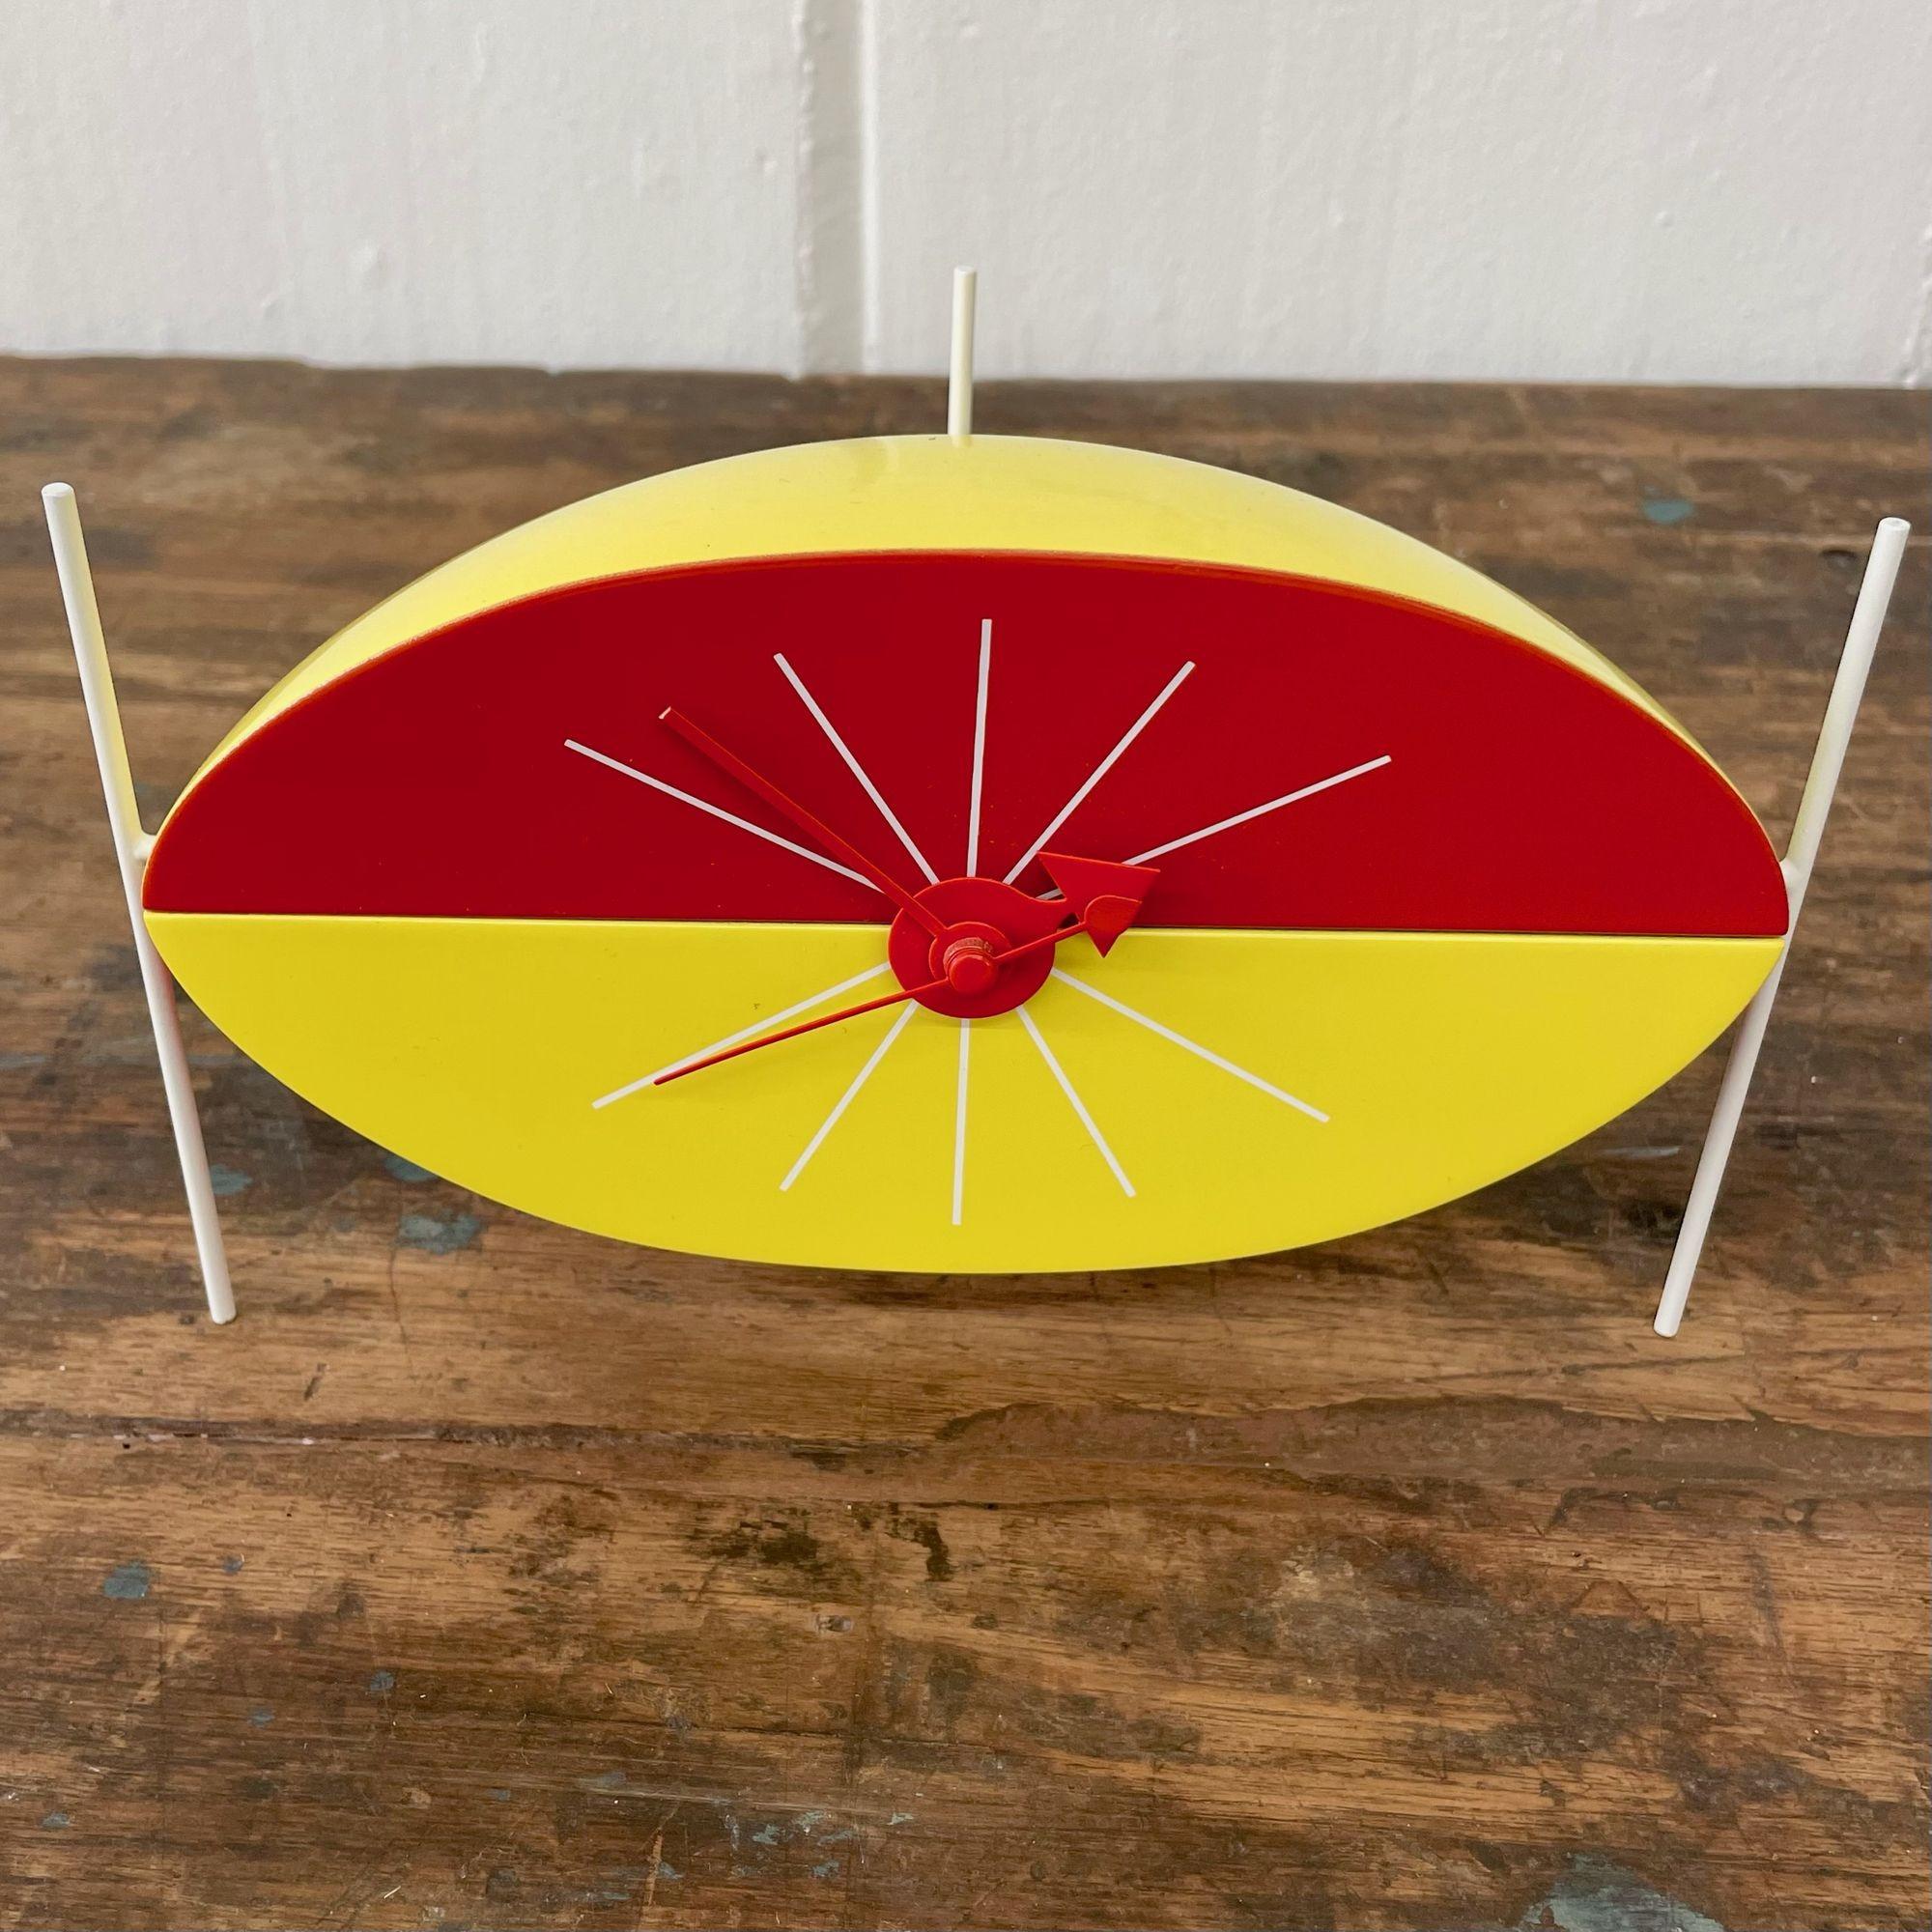 Metal Mid-Century Modern Watermelon Table Clock by George Nelson, Howard Miller, Vitra